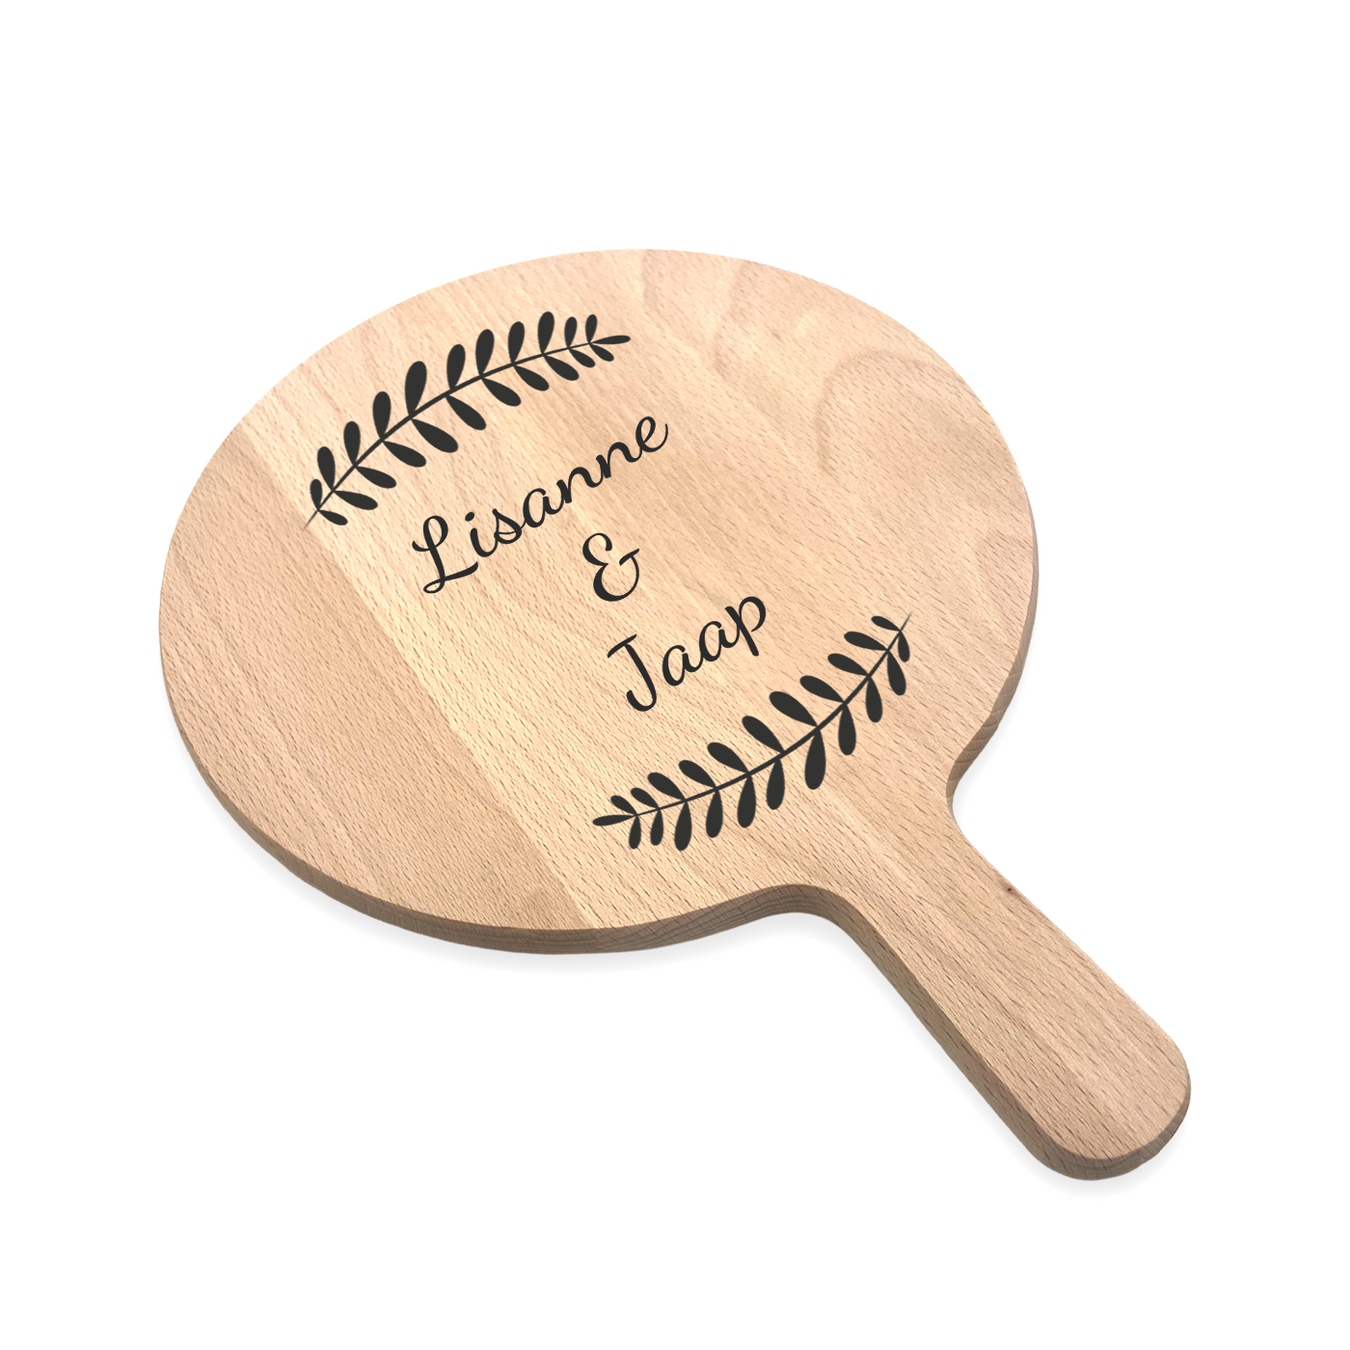 Personalized wooden bread board - Round shape My Customized